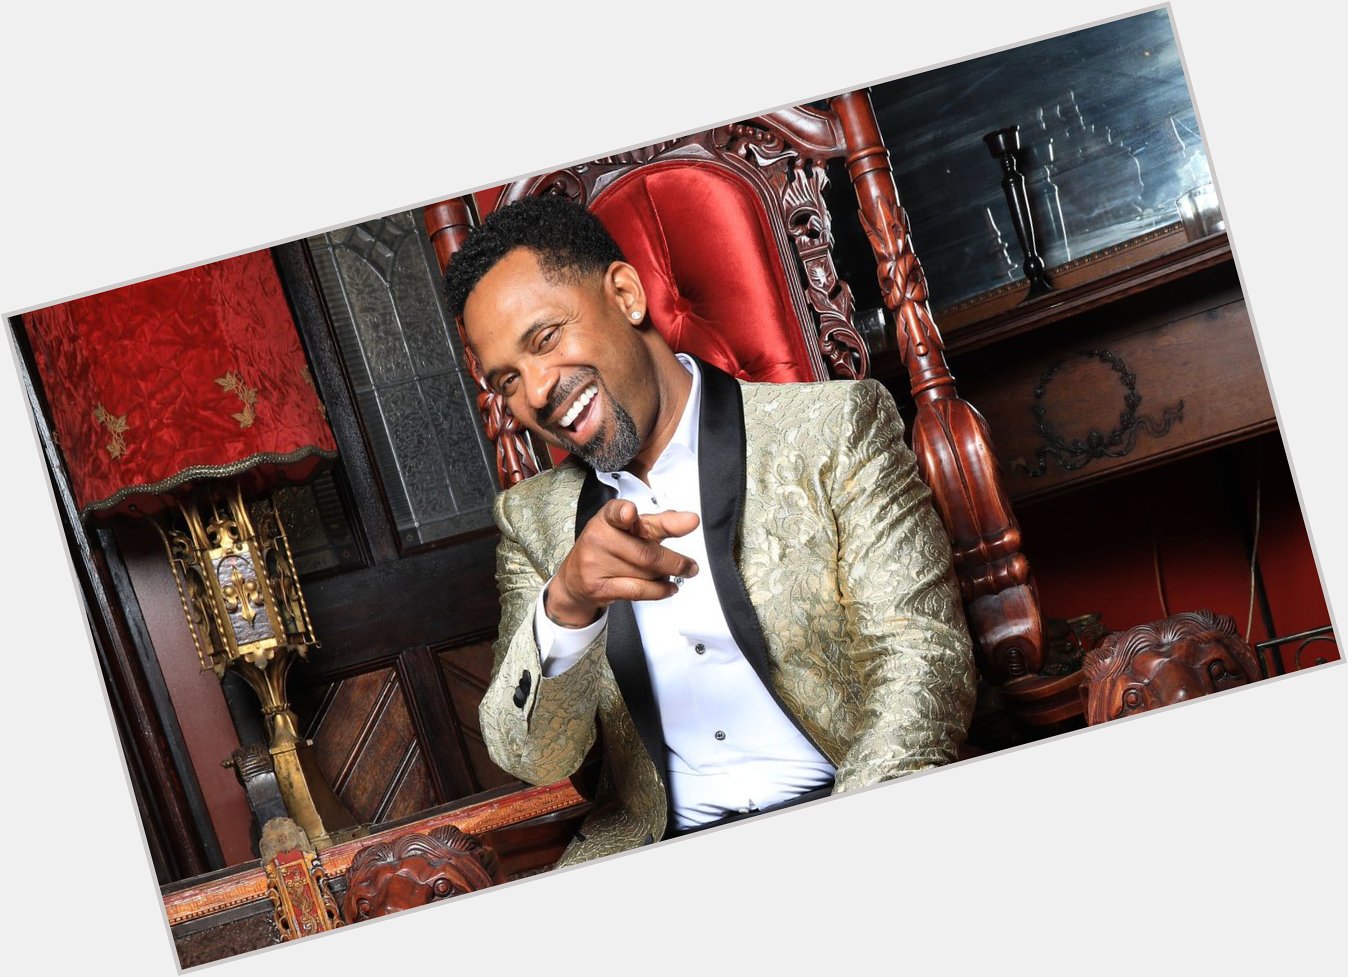 Wishing a Happy 50th birthday to comedian and actor Mike Epps  .What s your favorite Mike Epps role?  